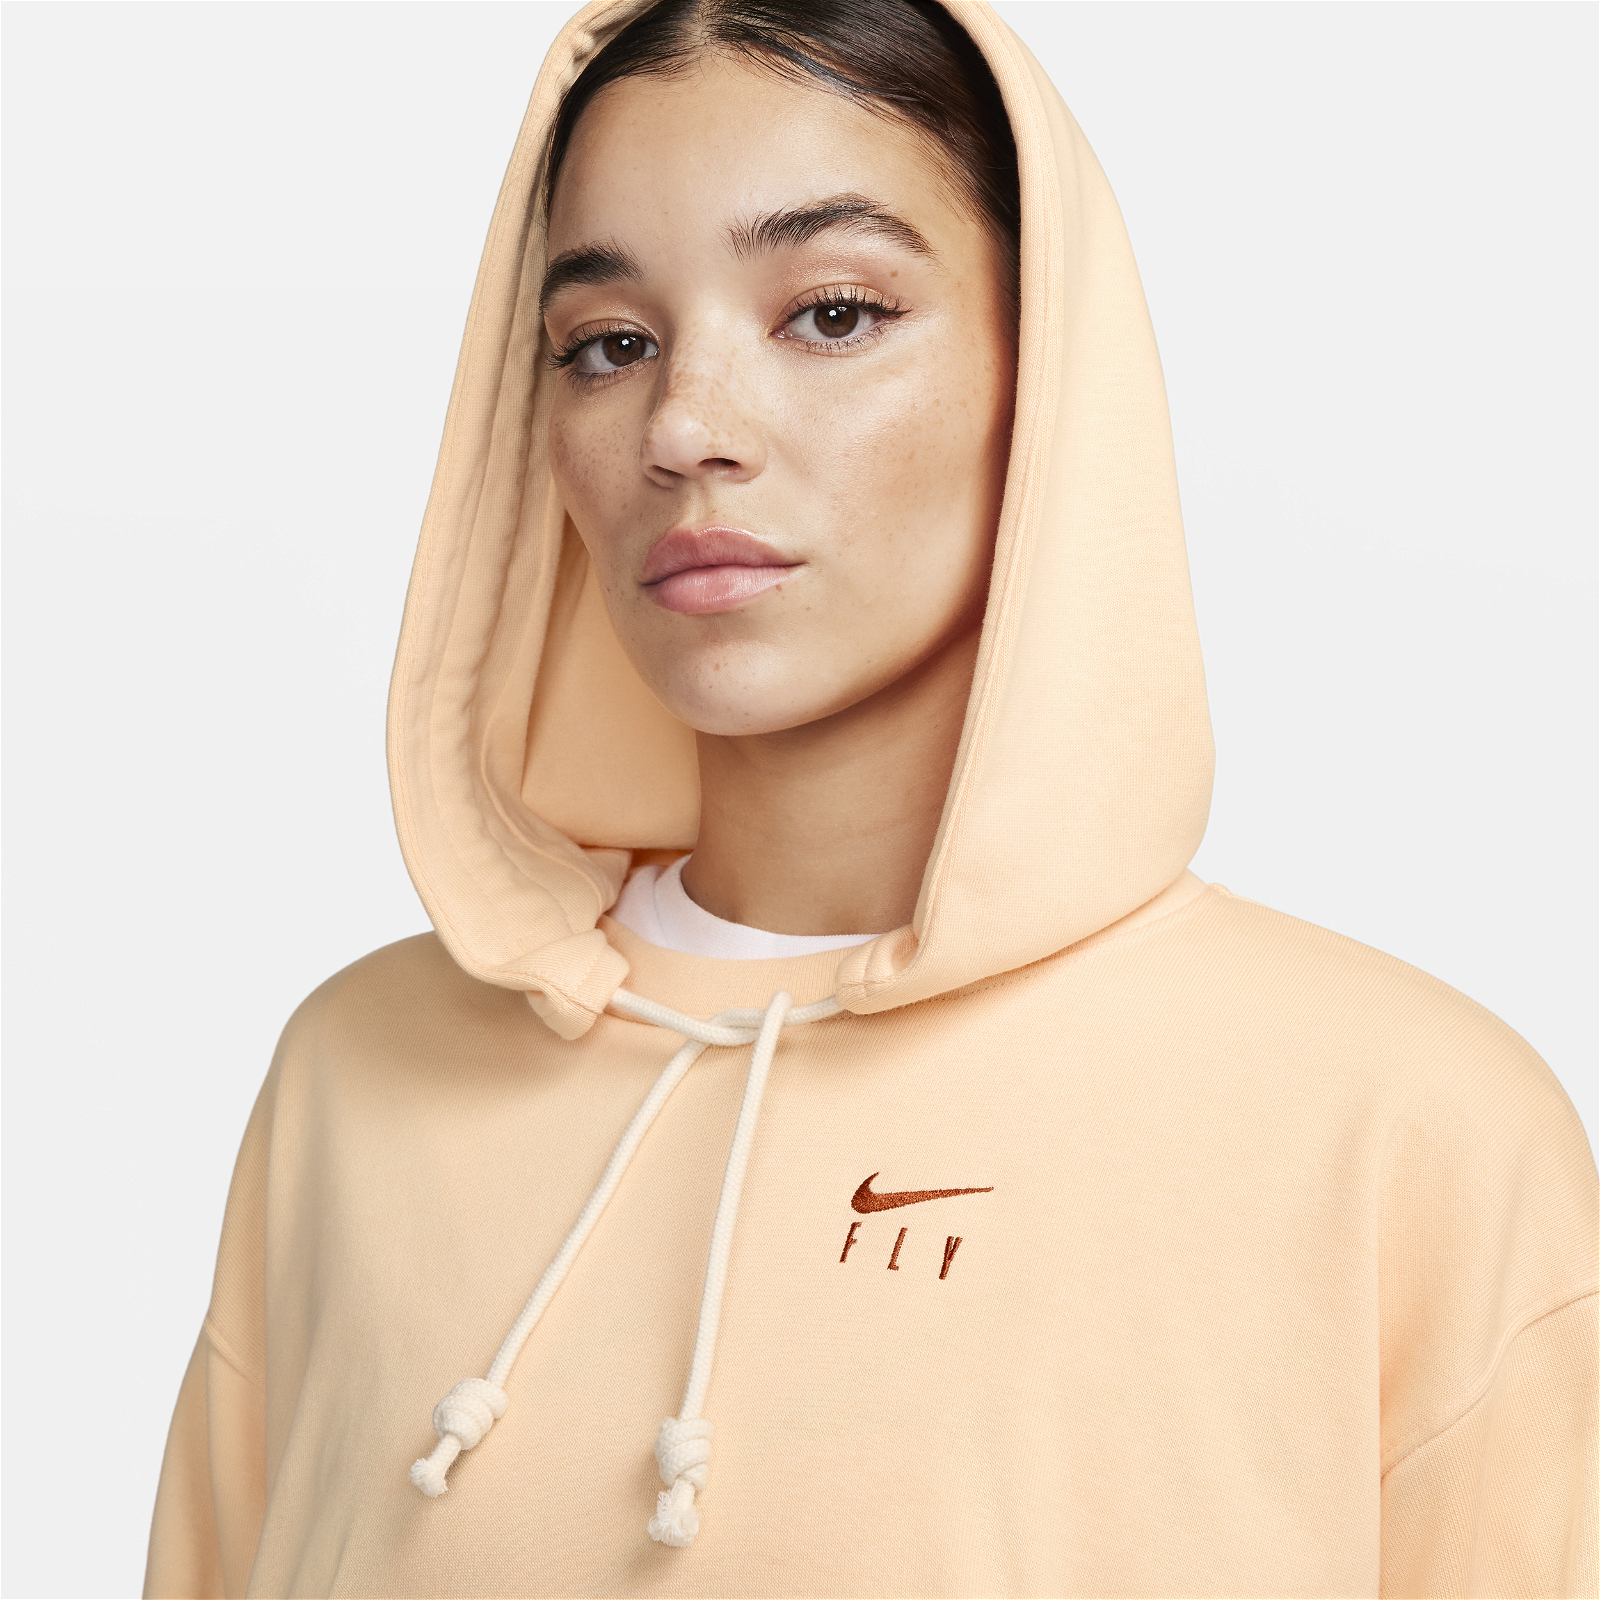 Dri-FIT Swoosh Fly Standard Issue Basketball Hoodie